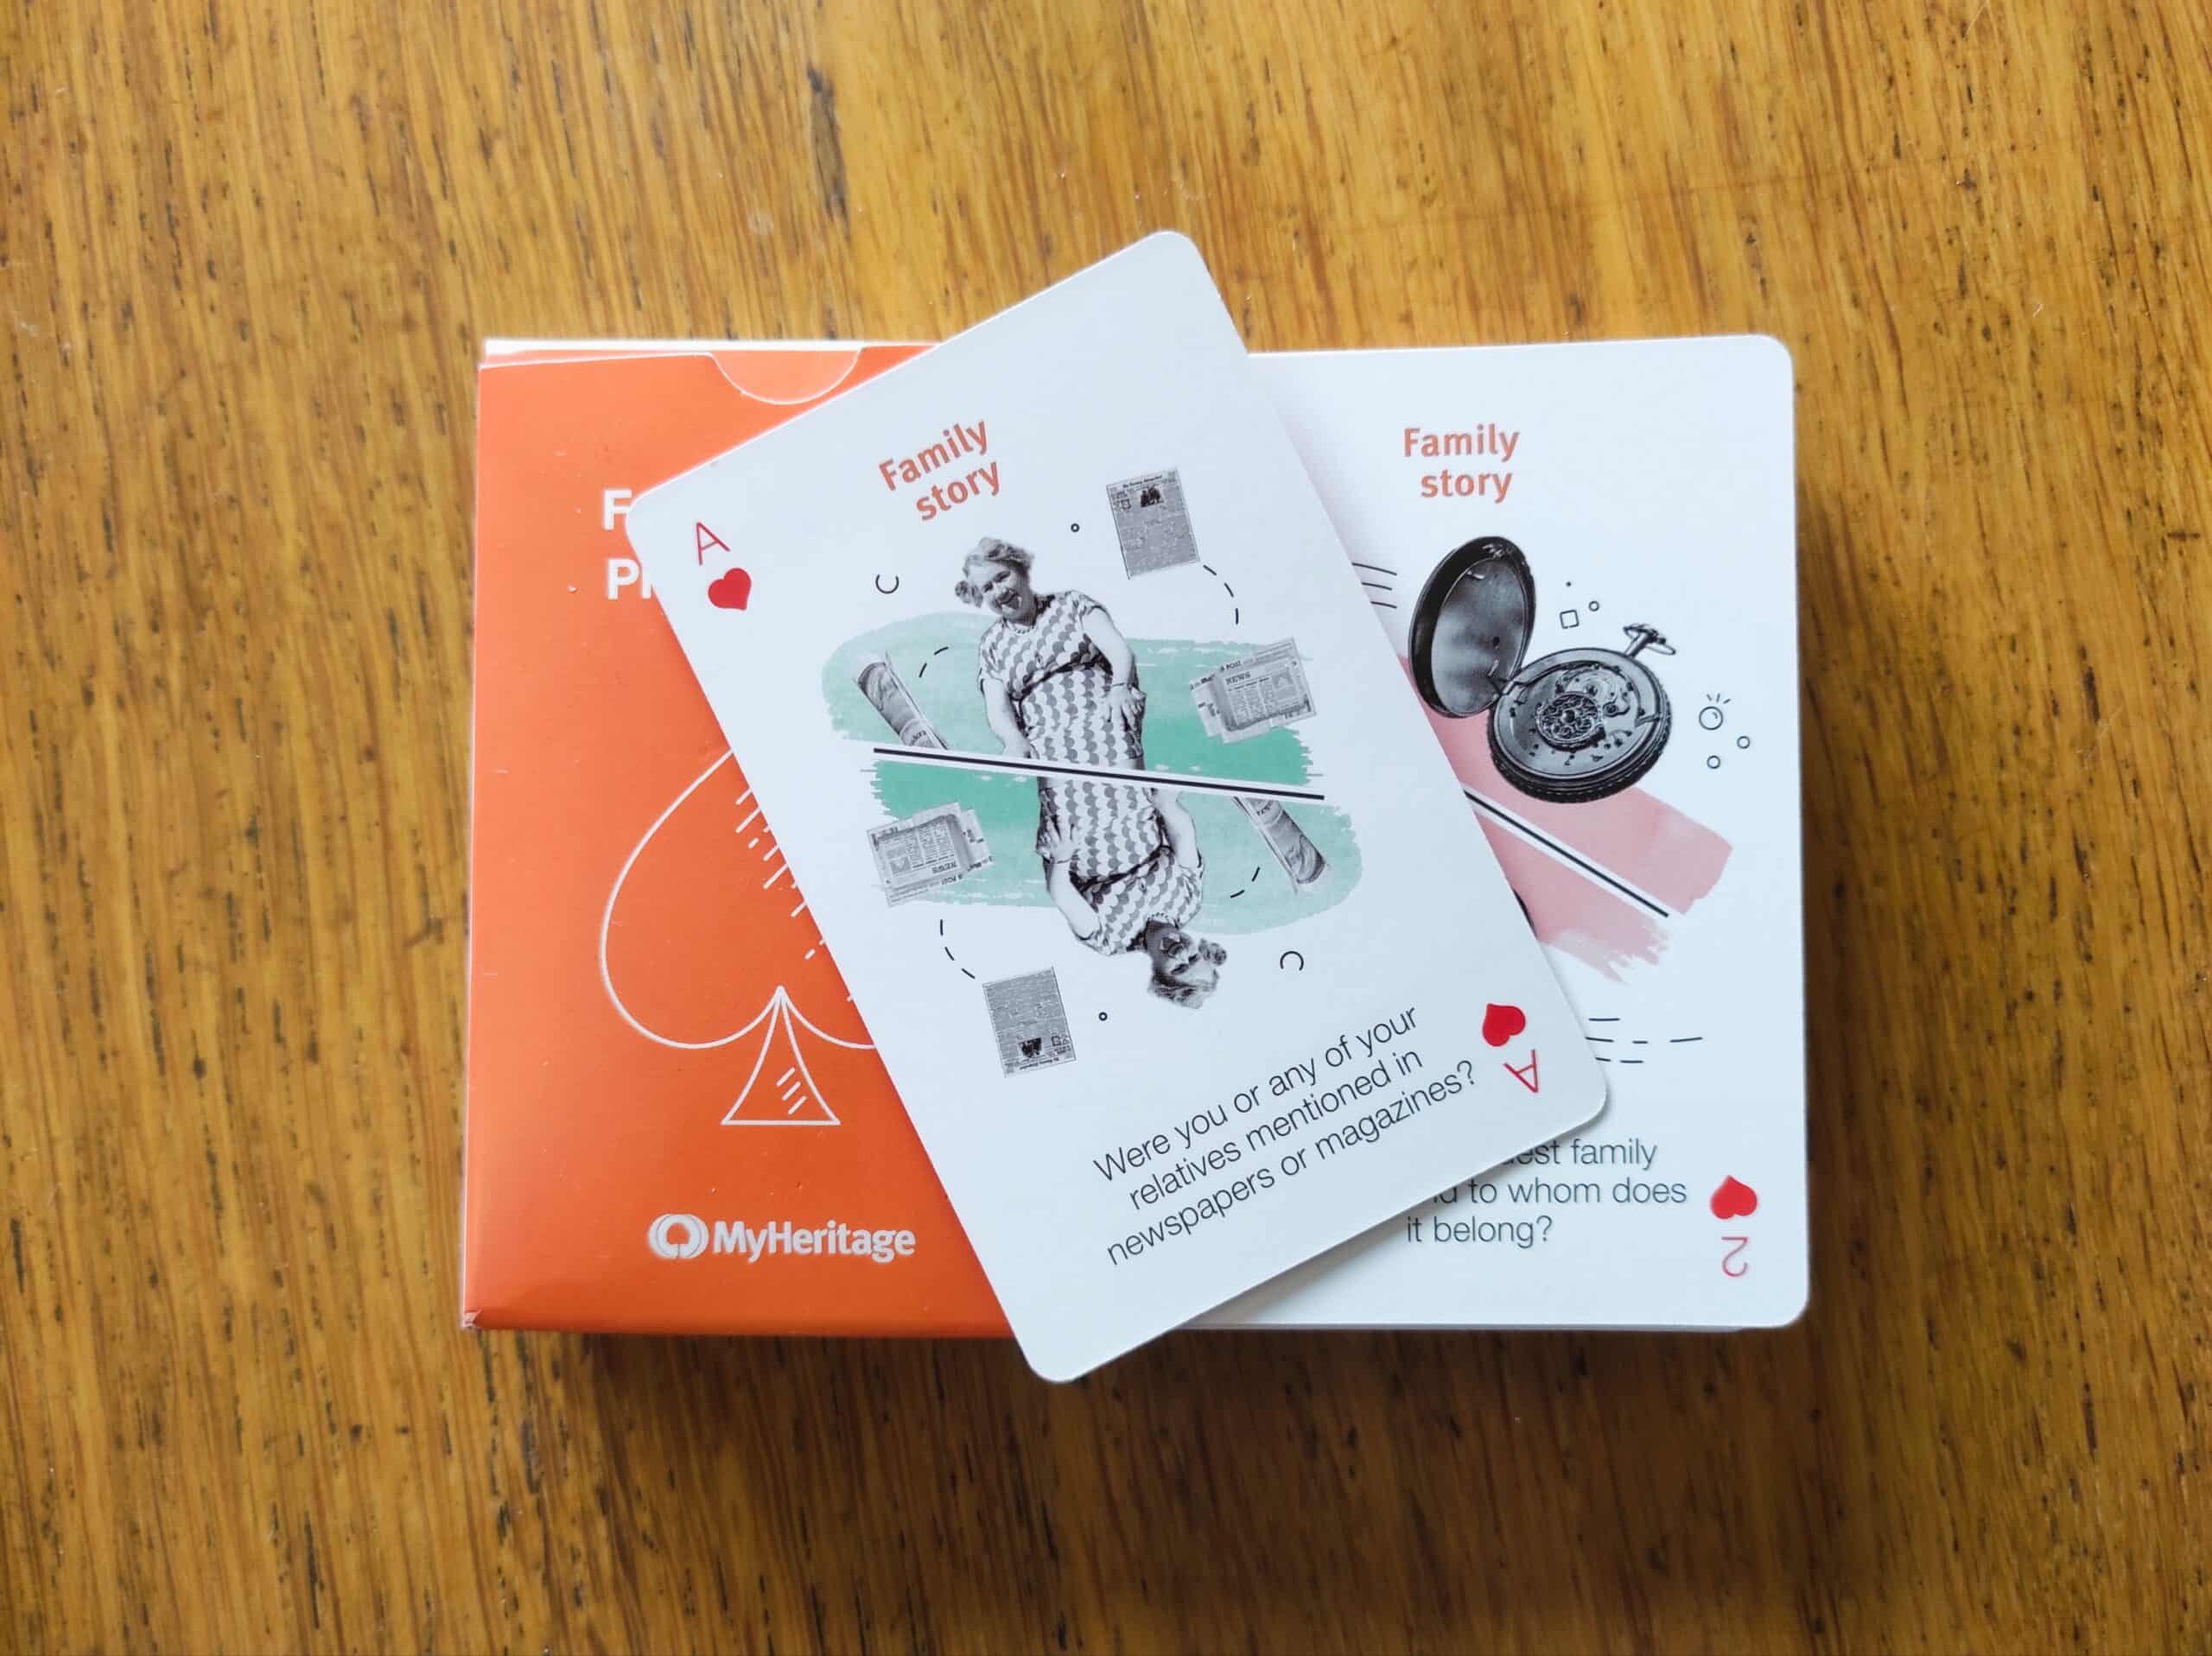 Sample card from the MyHeritage Family Stories Playing Cards